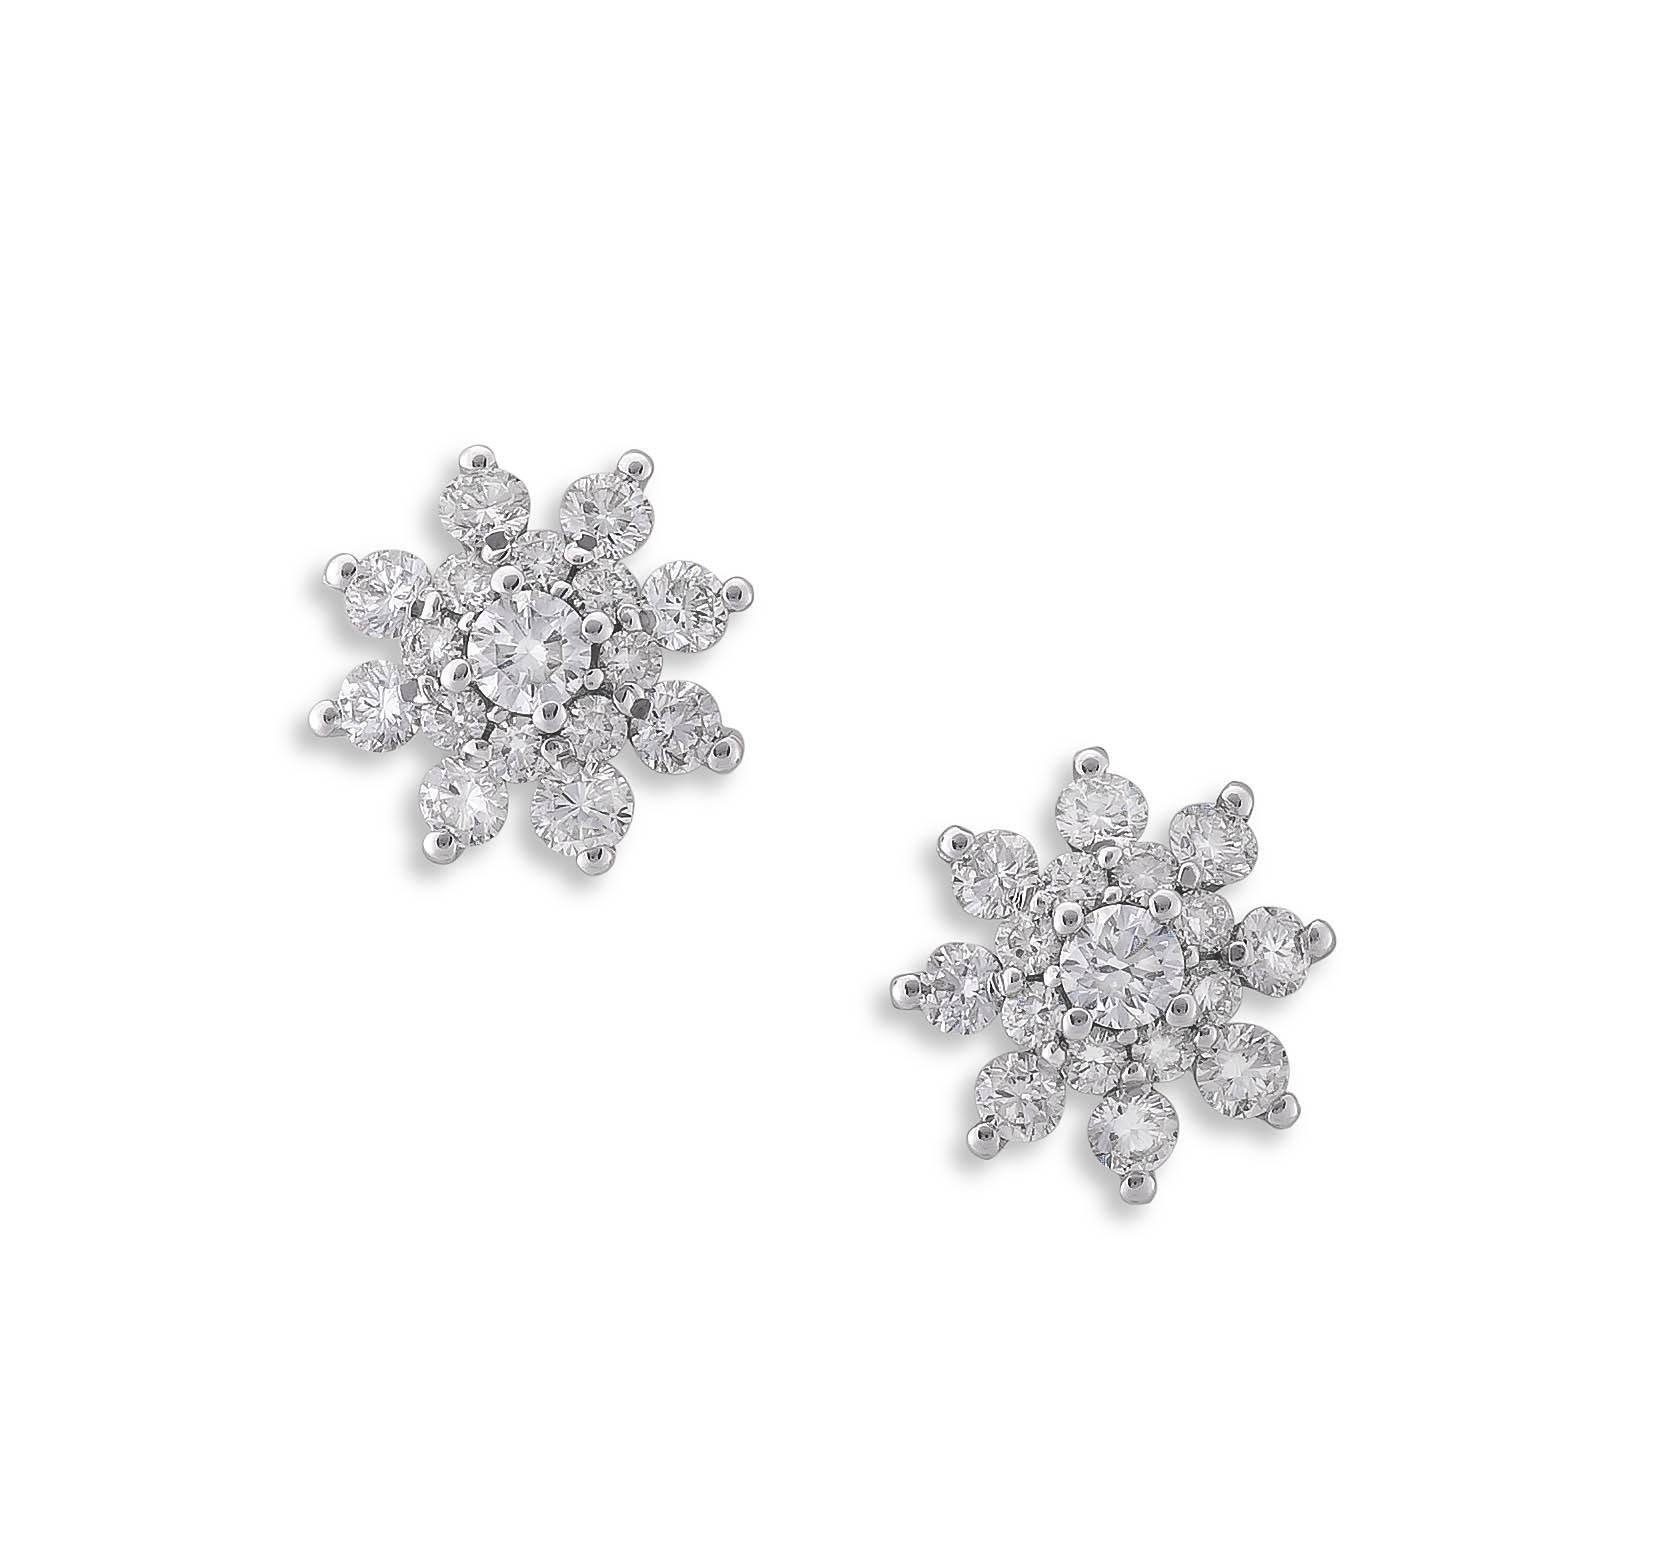 Pair of diamond and 14ct white gold earrings